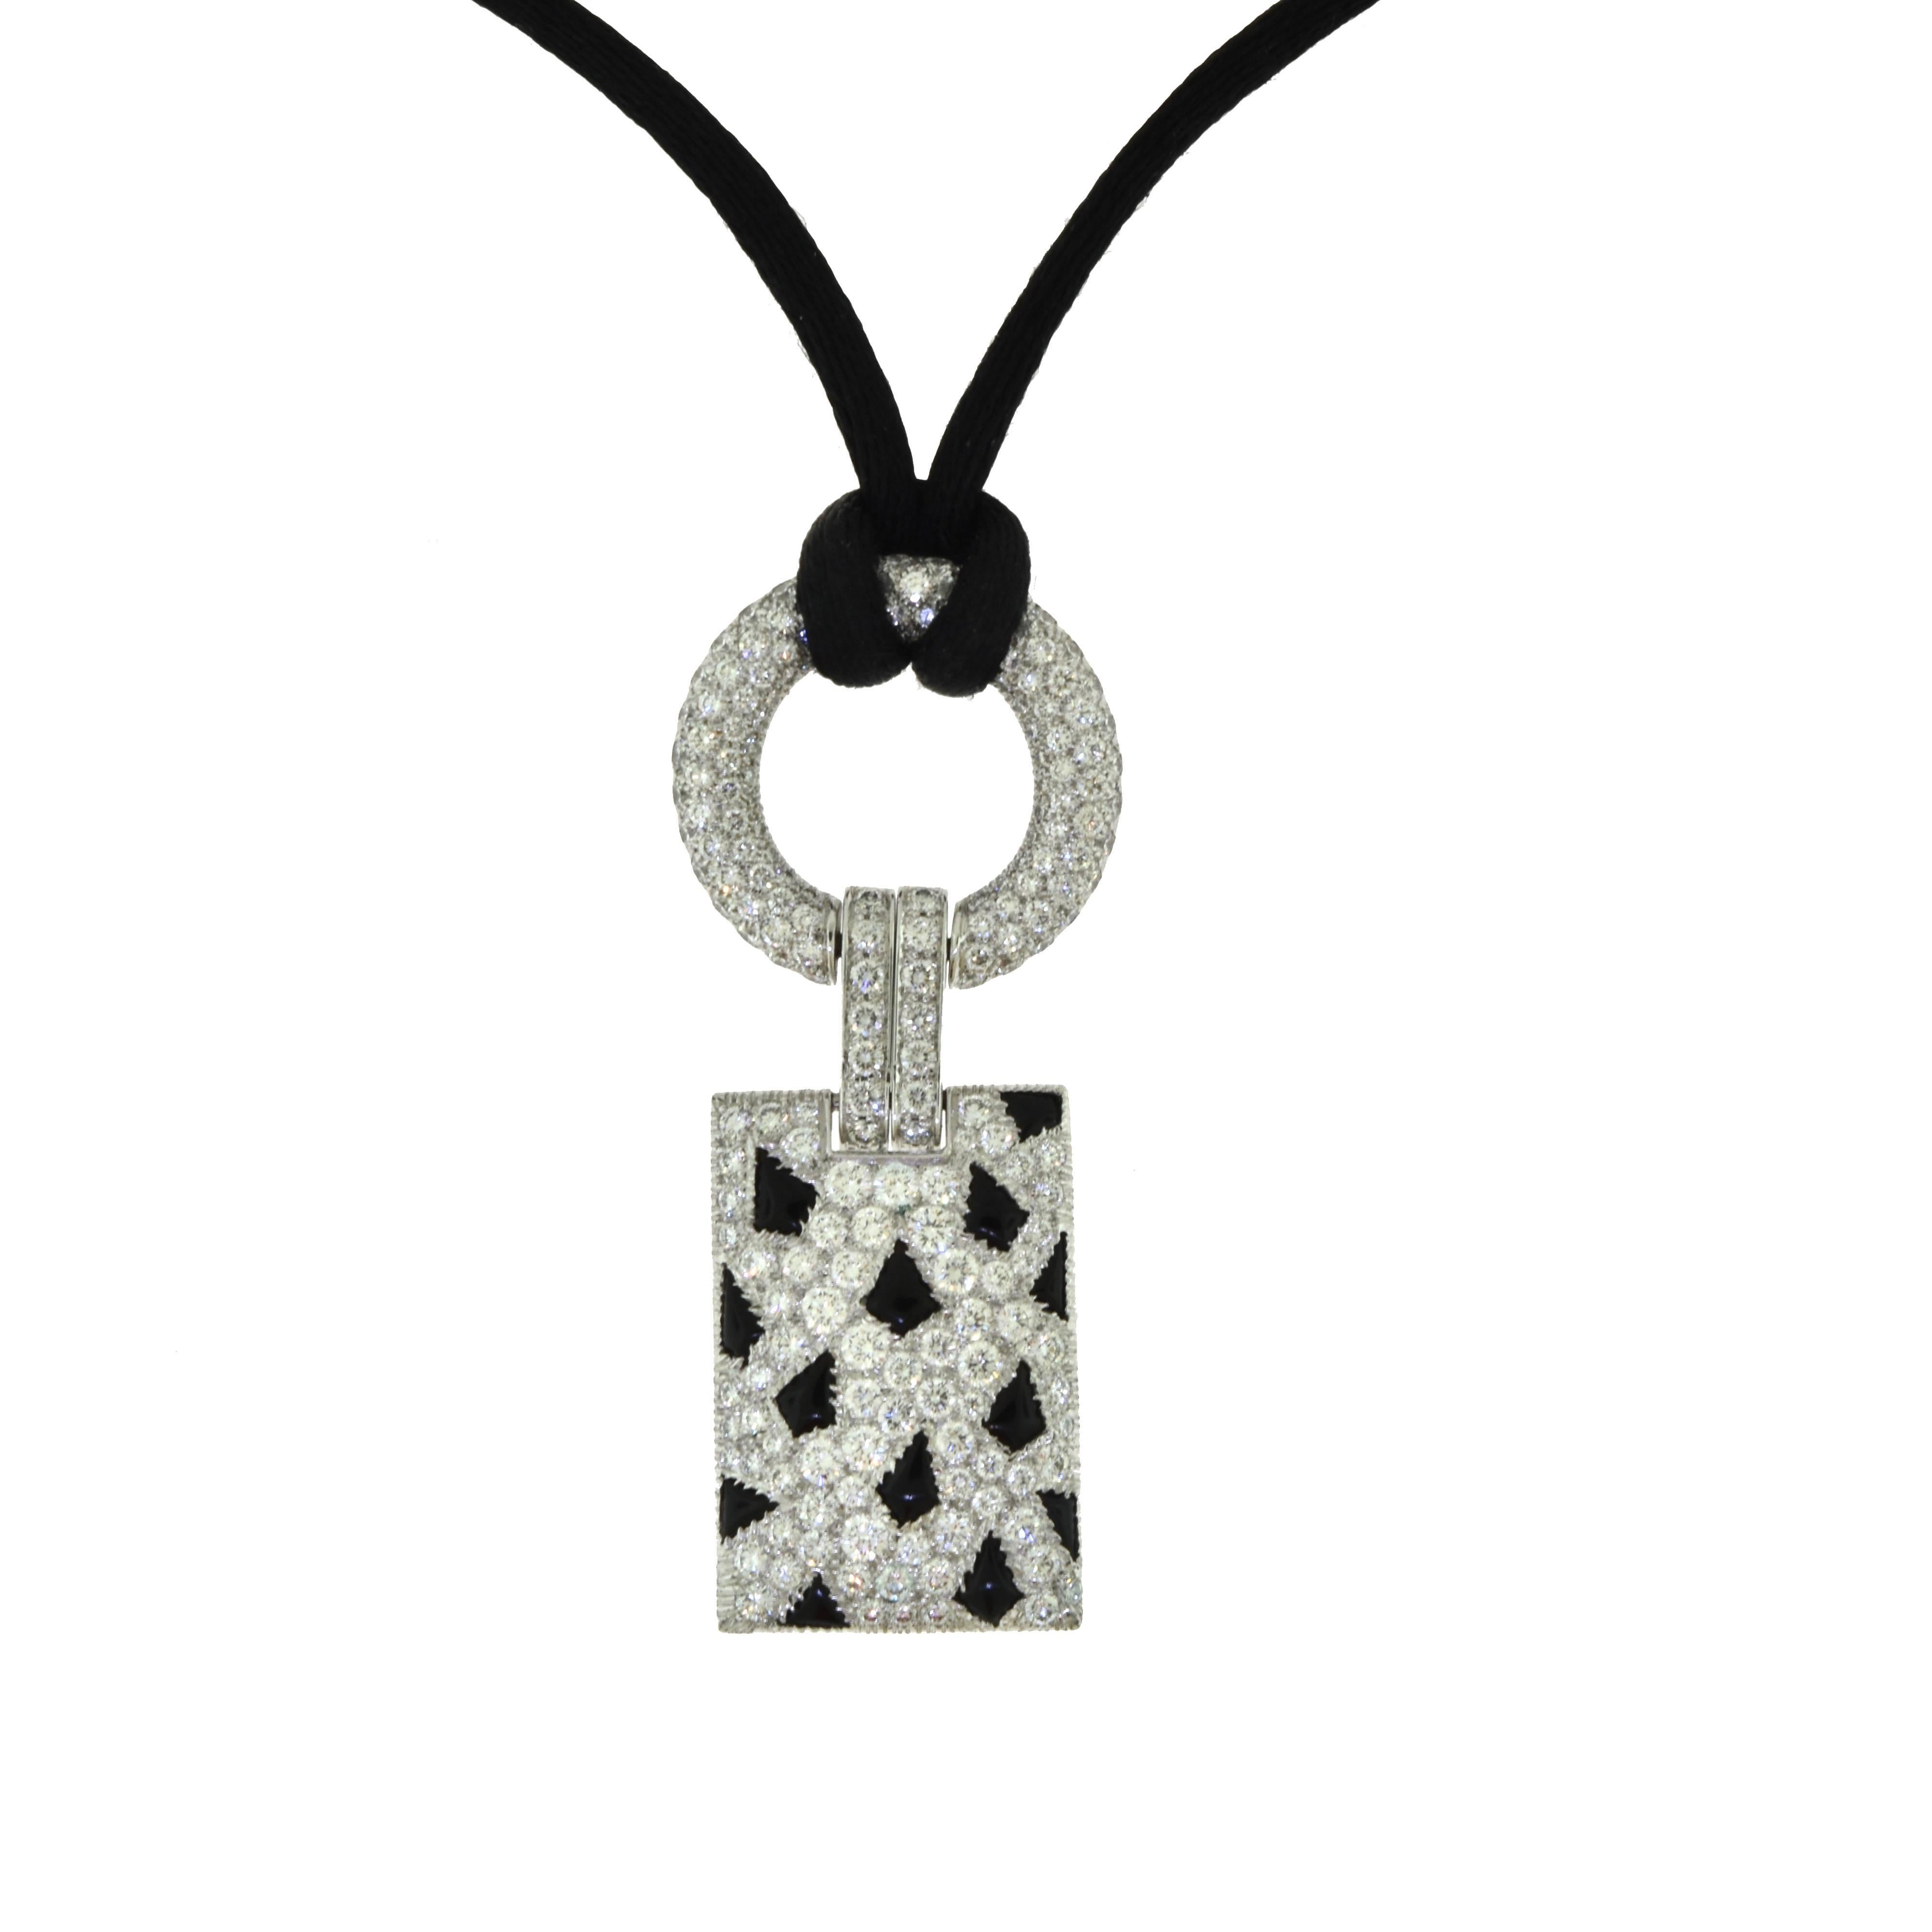 Set in 18k White Gold, this beautiful Cartier necklace from the Panthere de Cartier collection features round brilliant diamonds with spotted black onyx for that animalistic elegant look.

Total Carat Weight: 2.85 ct
Diamond Color: DEF 
Diamond